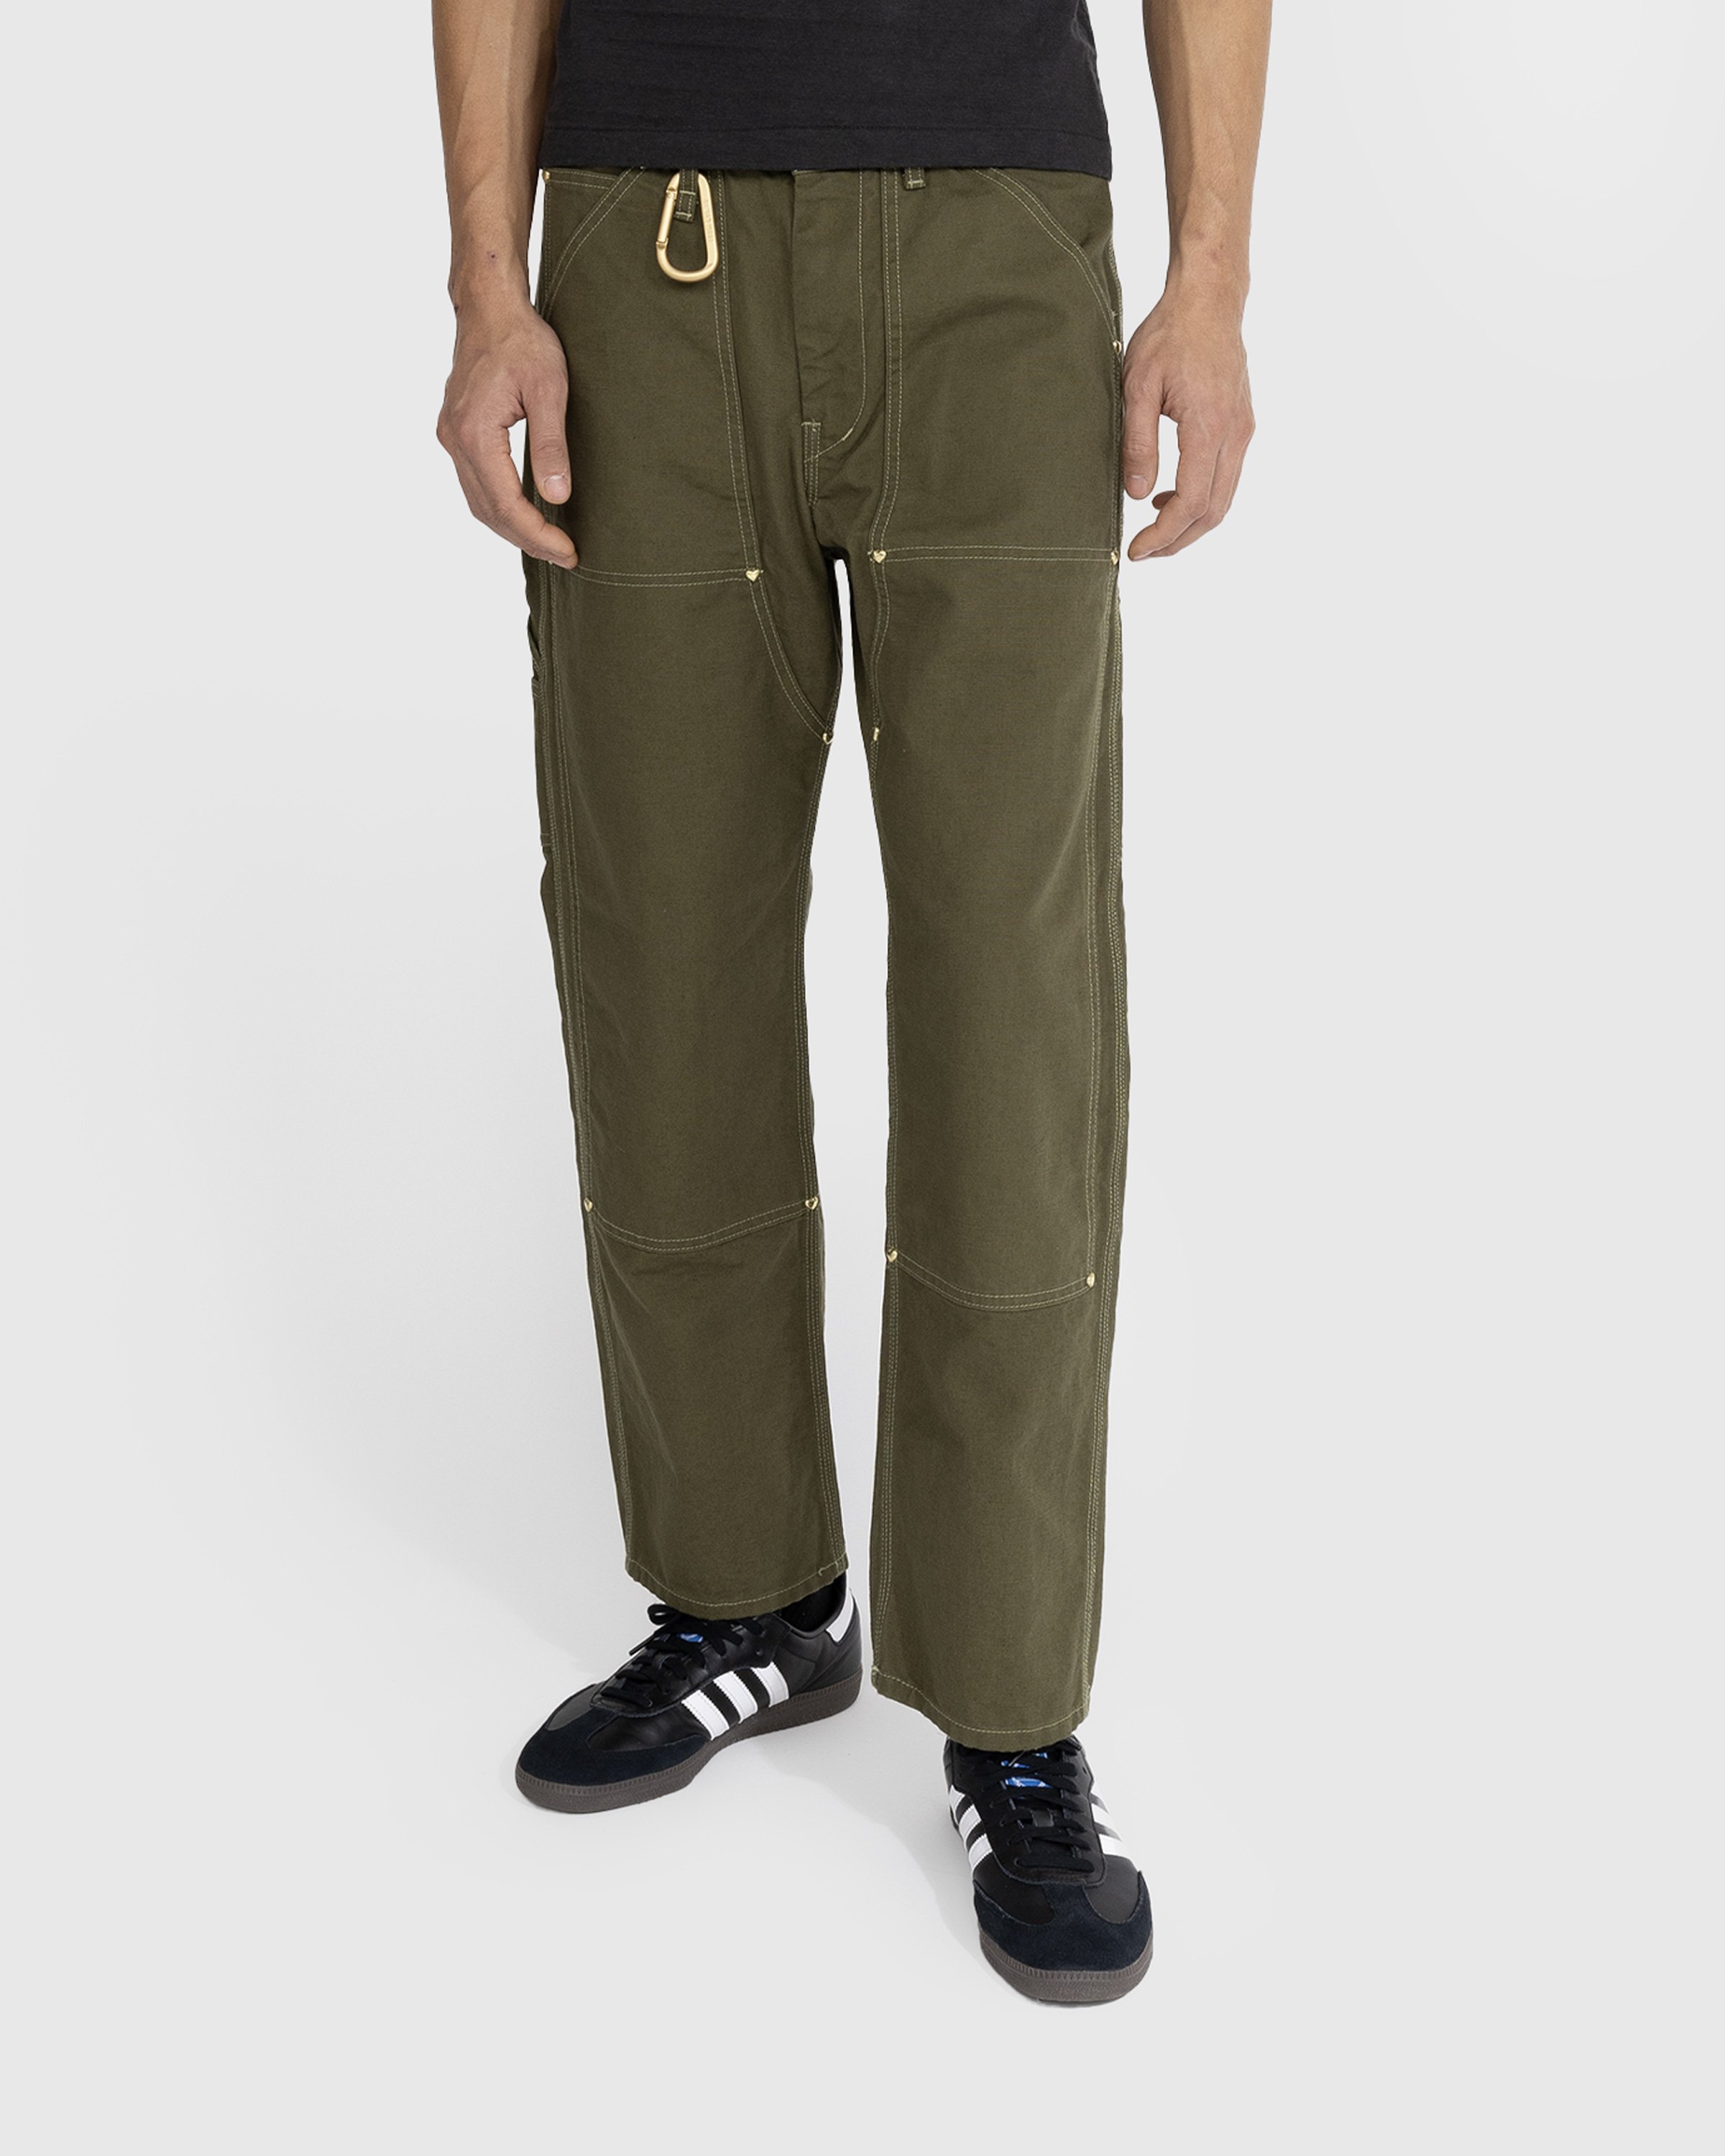 Human Made - Duck Painter Pants Olive Drab - Clothing - Green - Image 2